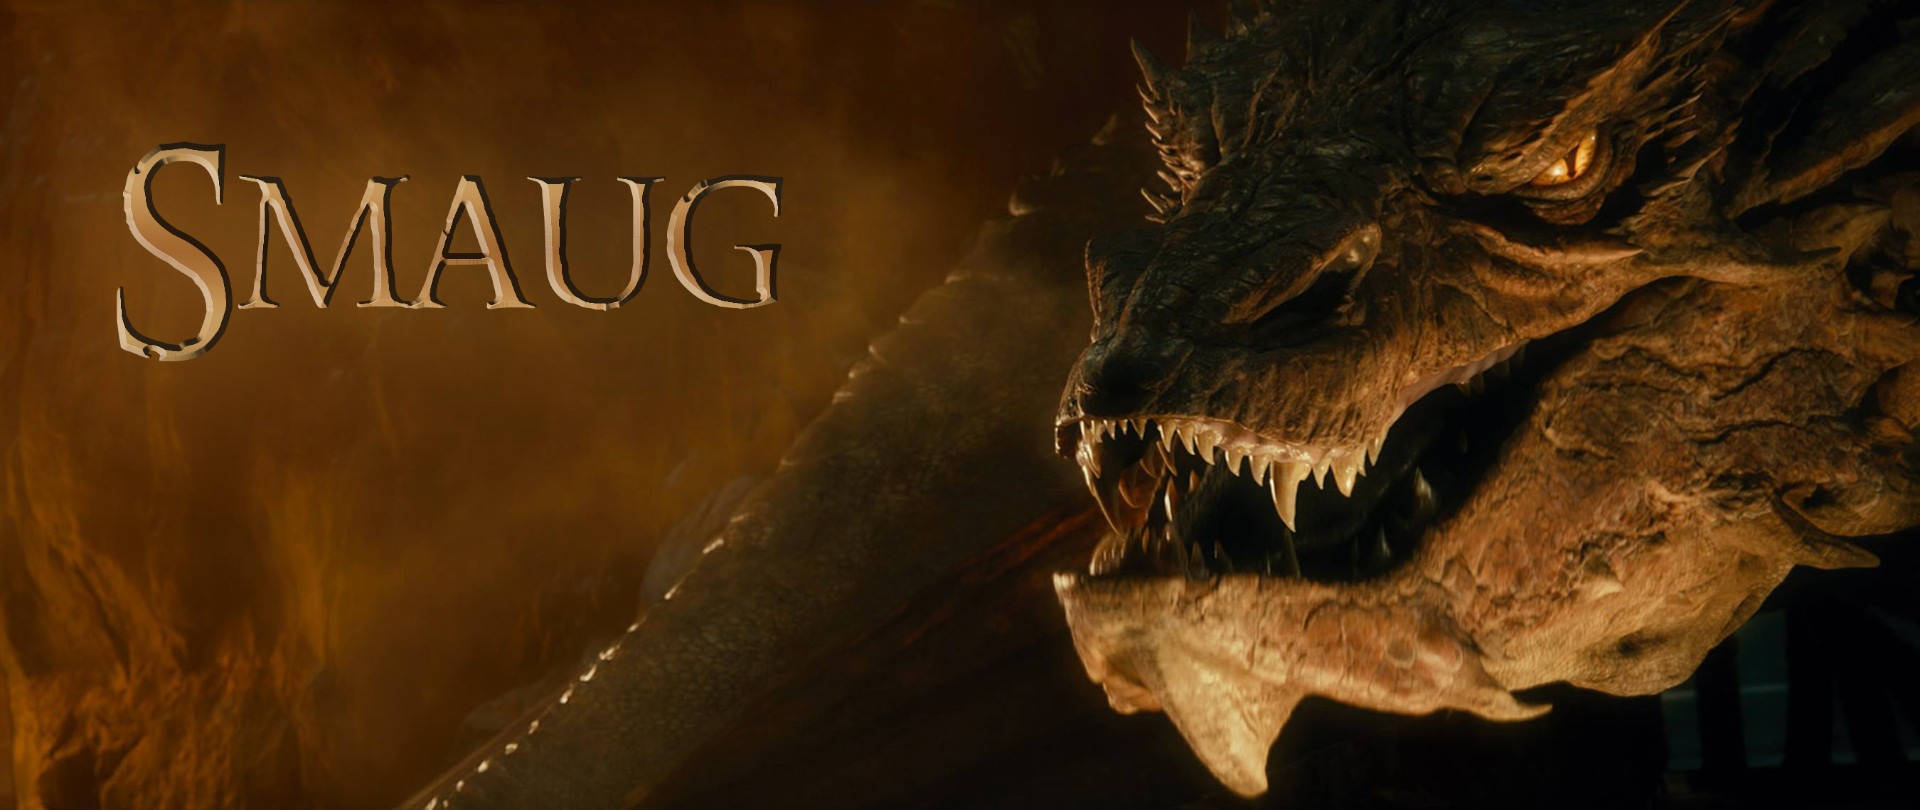 Dragon From The Movie Hobbit Desolation Of Smaug Wallpaper